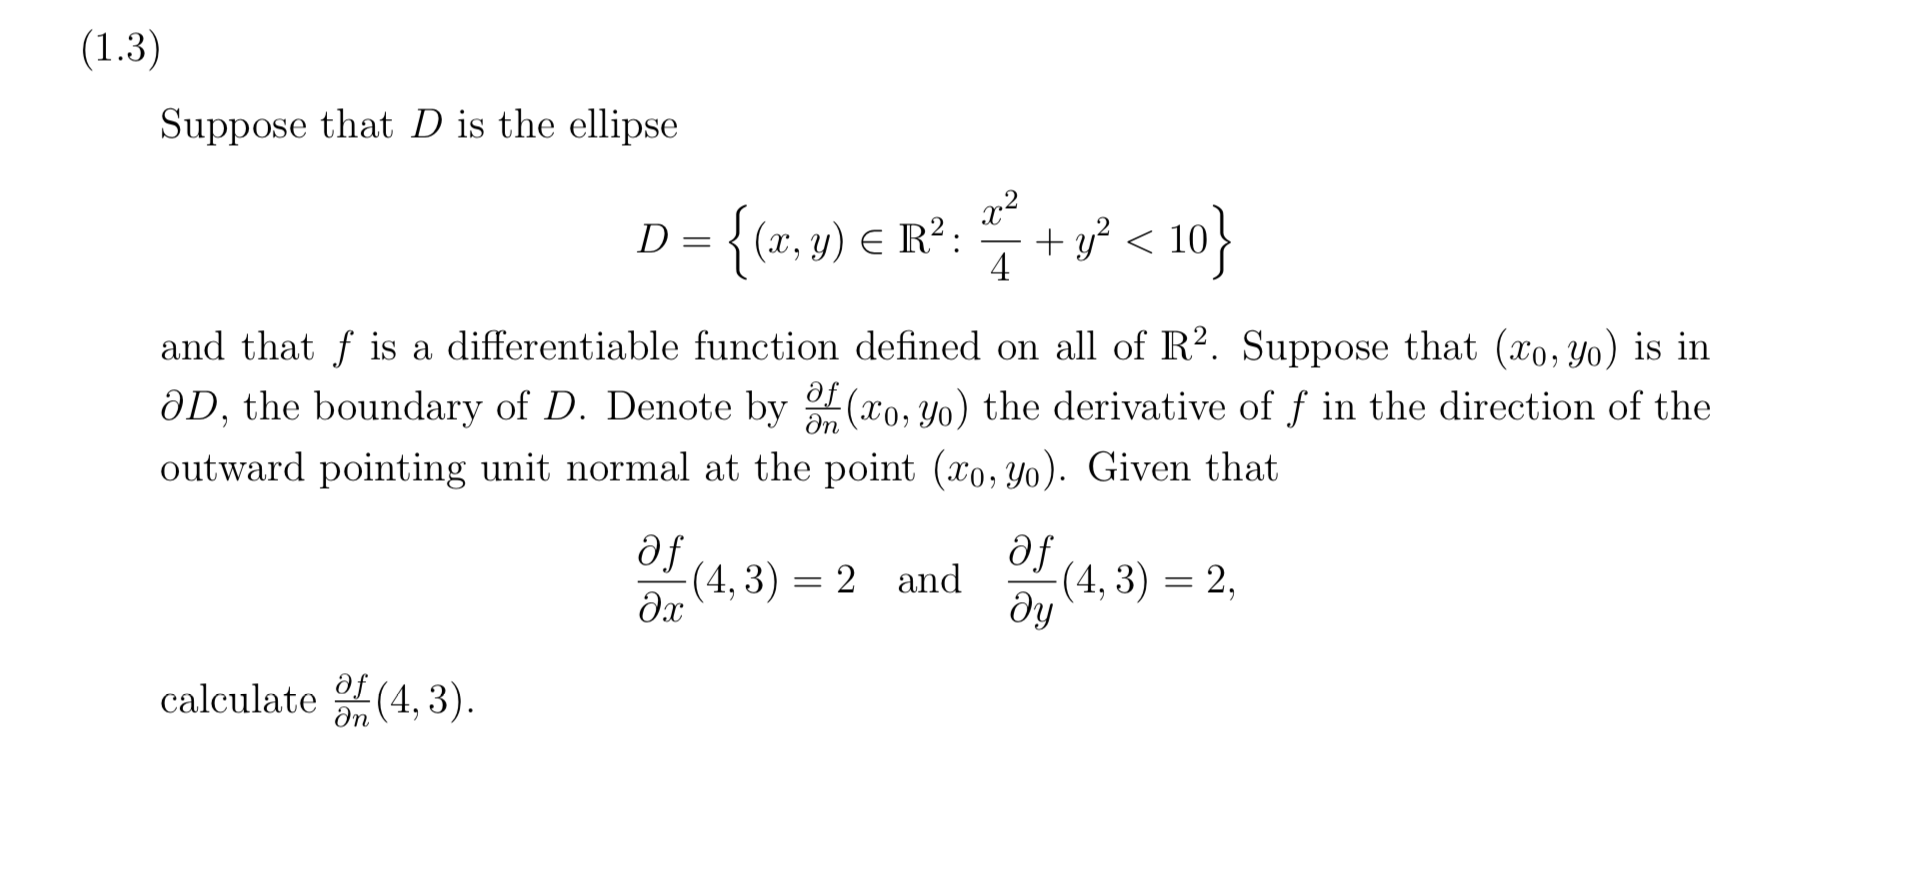 Suppose that D is the ellipse
D={tr, ») € R°: + v* < 10}
{(x, y) € R²:
+ y? < 10}
D =
4
and that f is a differentiable function defined on all of R². Suppose that (xo, Yo) is in
ƏD, the boundary of D. Denote by (xo, Yo) the derivative of ƒ in the direction of the
outward pointing unit normal at the point (xo, Yo). Given that
fe
(4, 3) = 2 and
df
(4, 3) = 2,
dy
calculate (4, 3).
